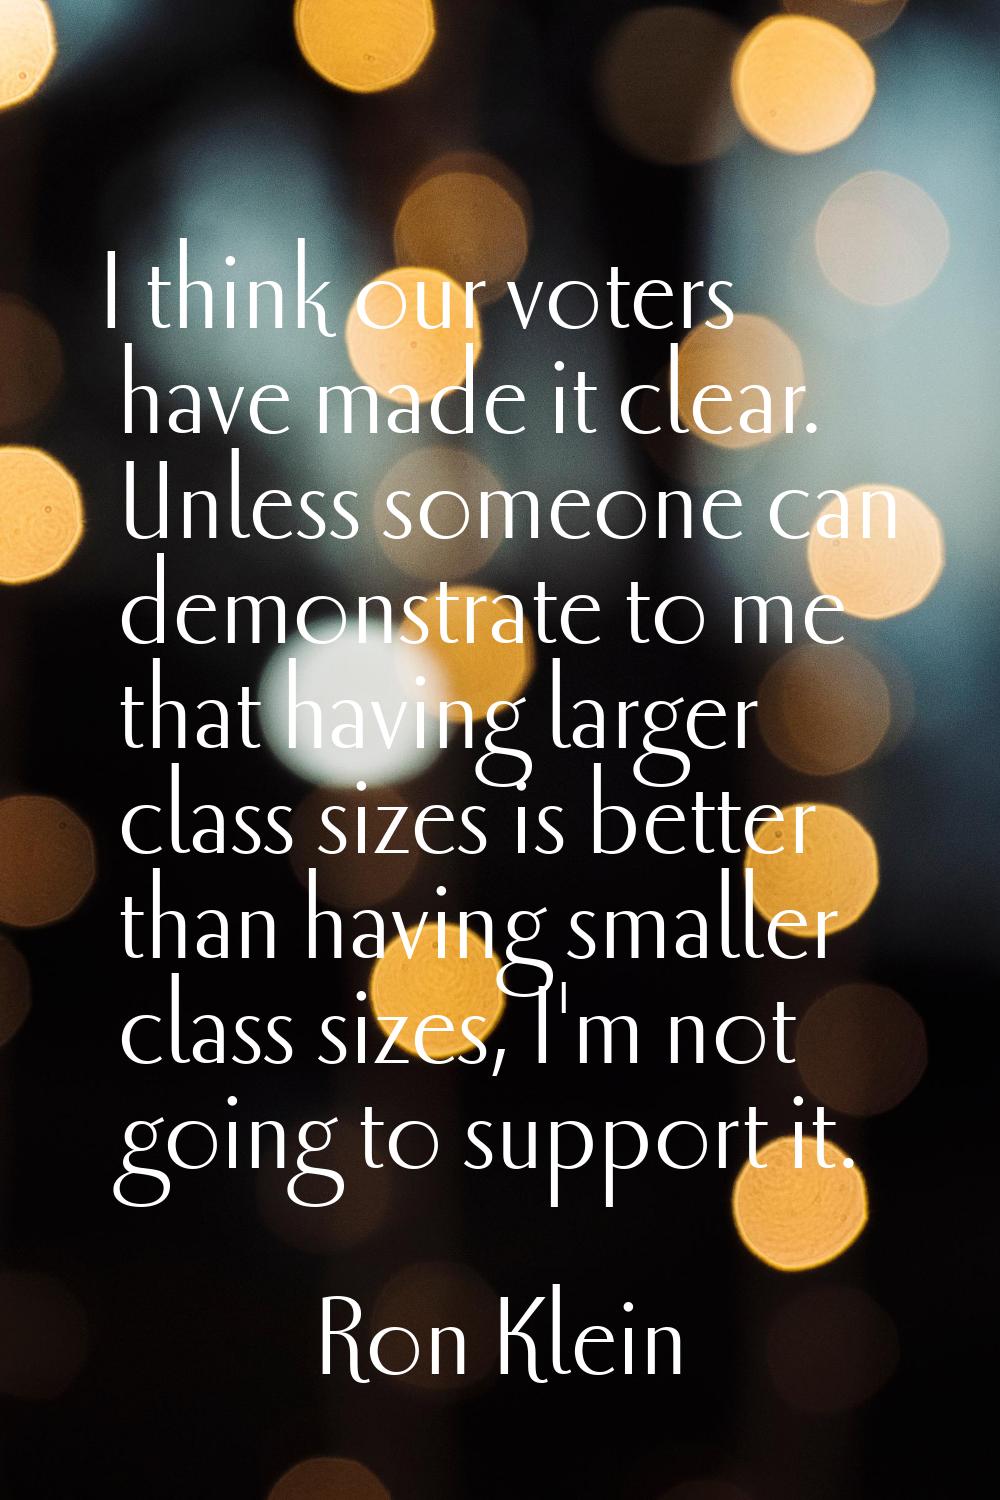 I think our voters have made it clear. Unless someone can demonstrate to me that having larger clas